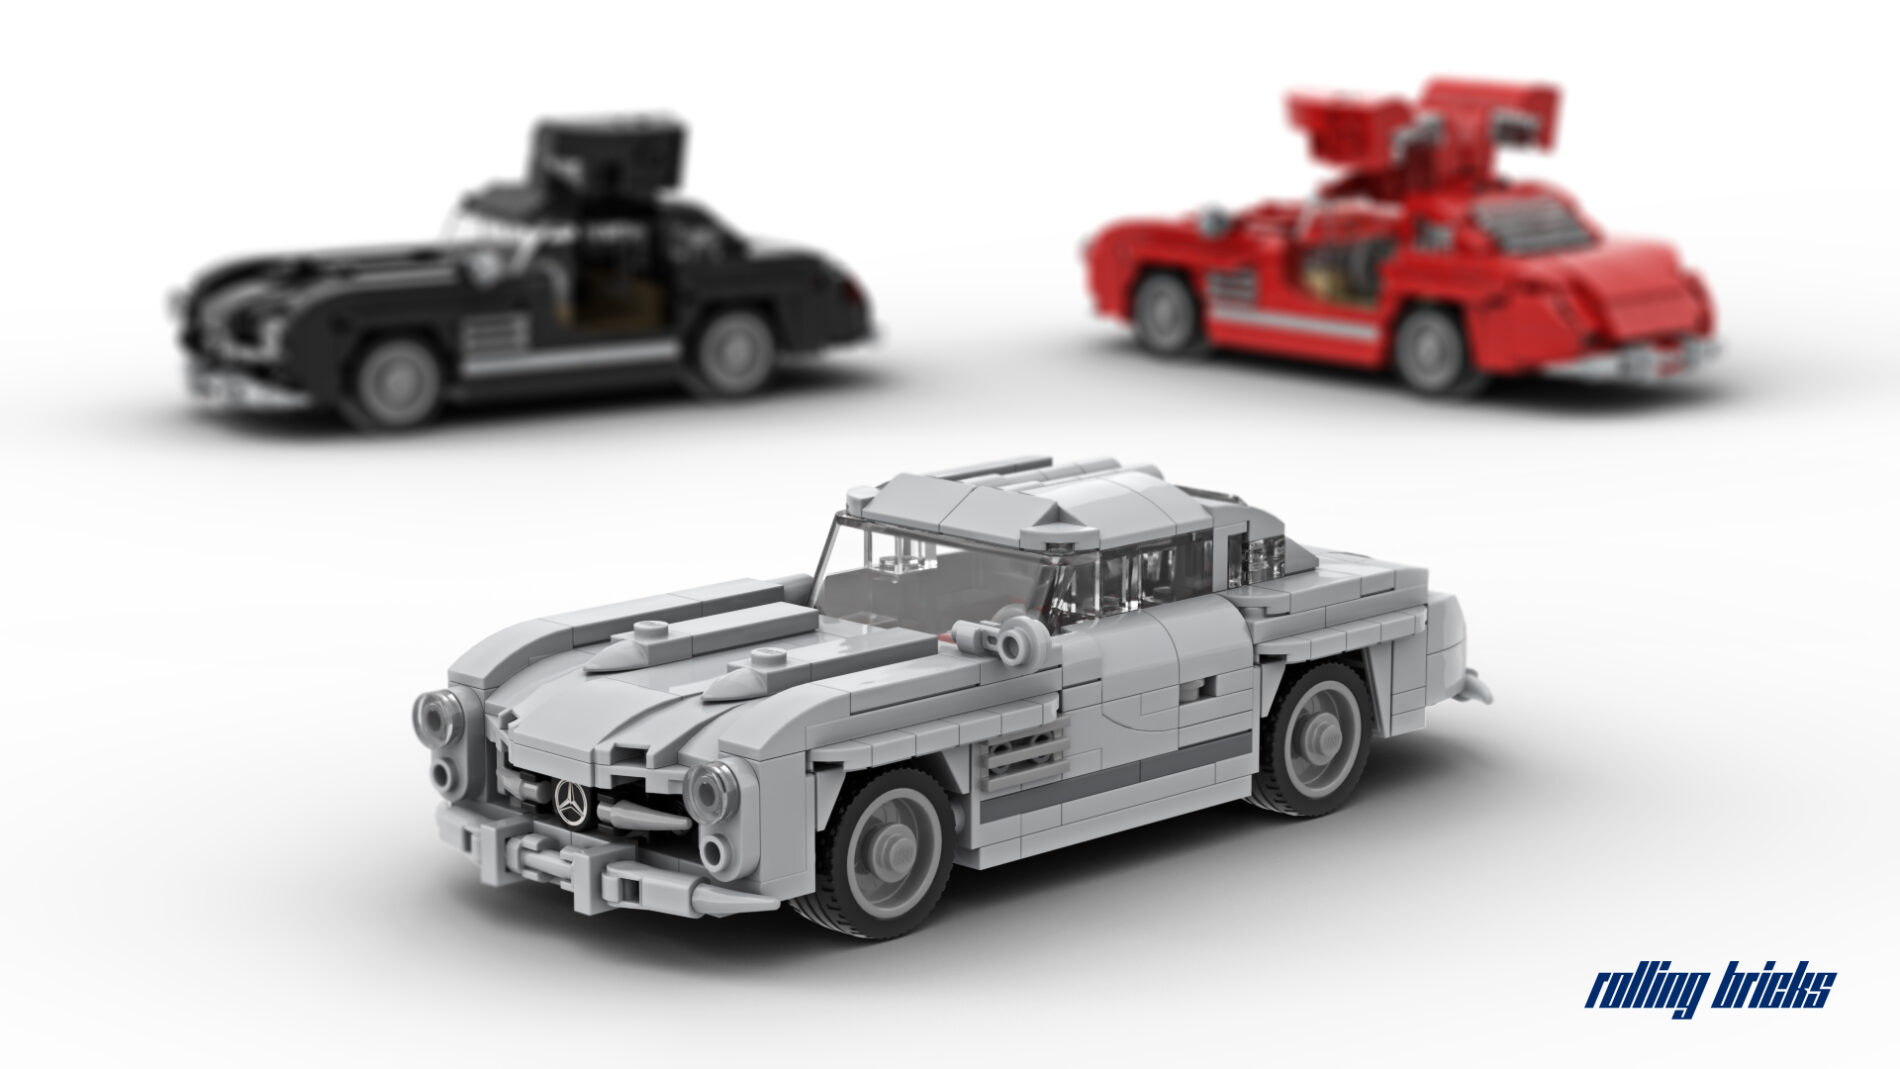 Mercedes-Benz 300 SL - in 3 colors: light gray, black, red